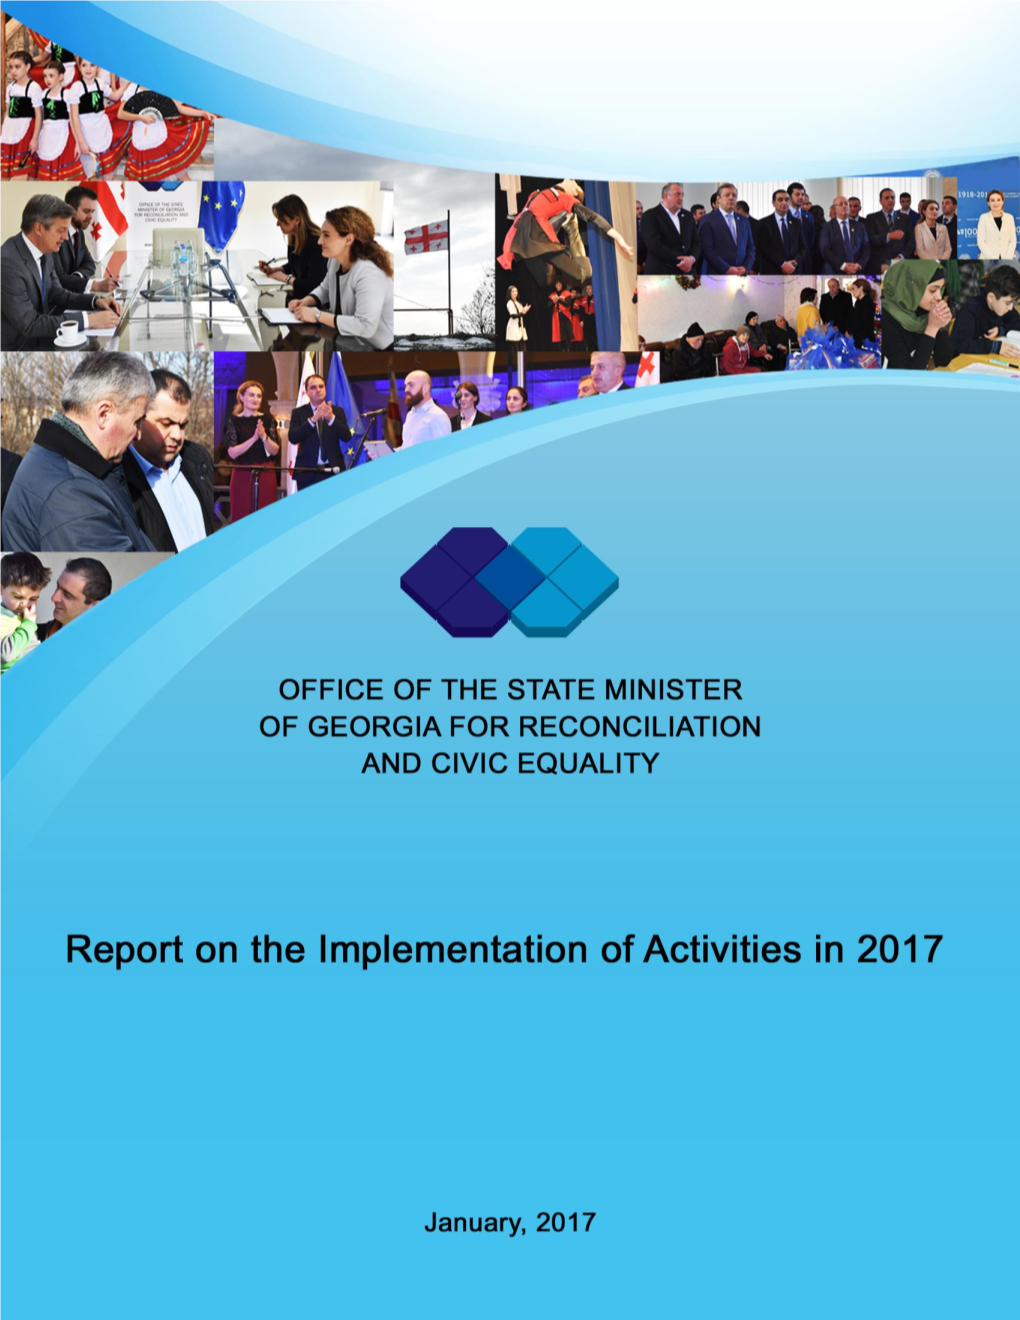 Report on the Implementation of Activities in 2017